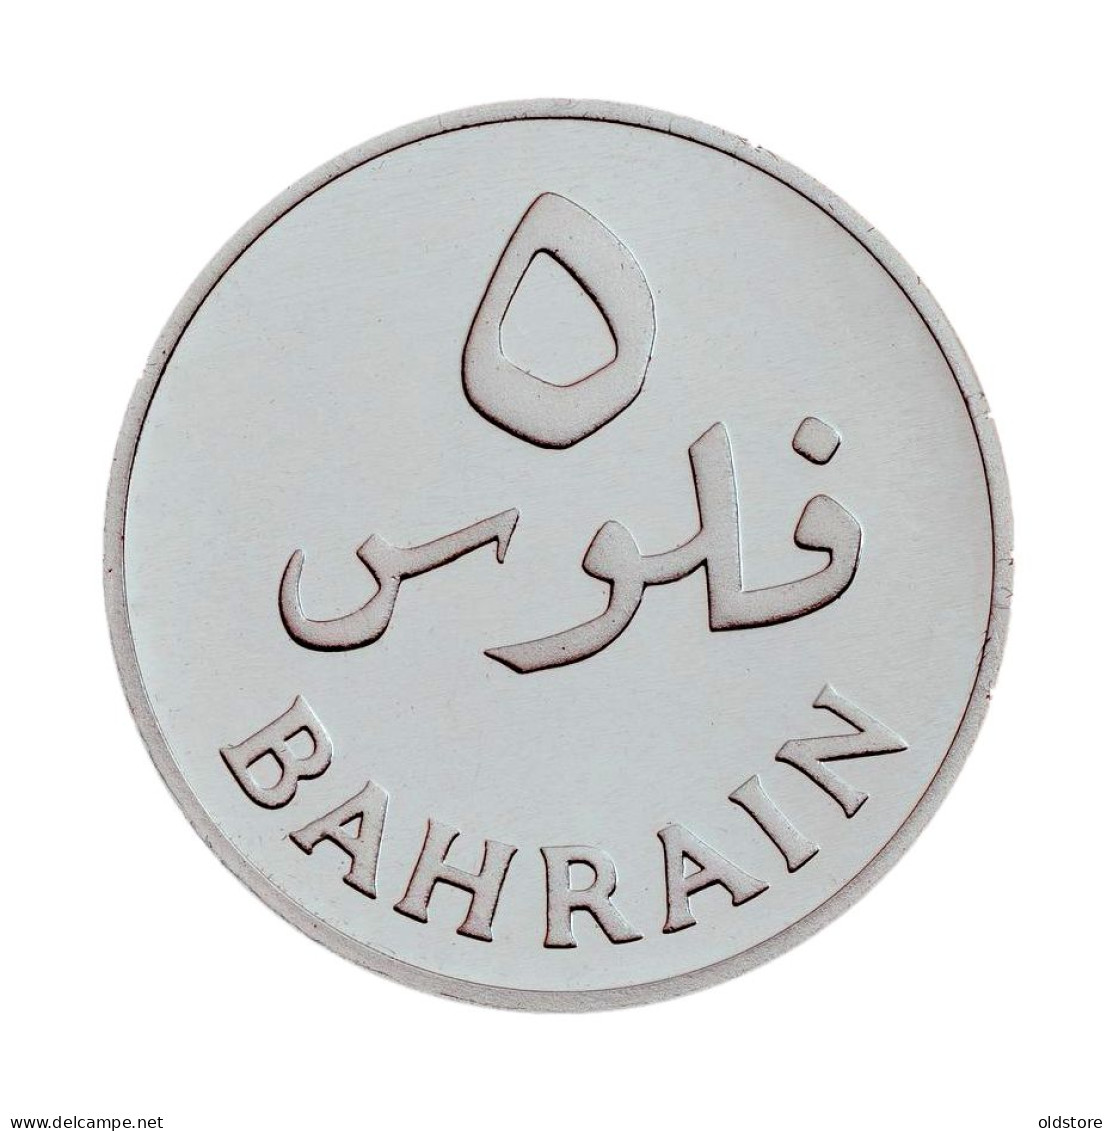 Bahrain Coins - MINT (5 Fils ) Proof  -  Sterling Silver - ND 1983 - Mint Silver Coins - Bahrain